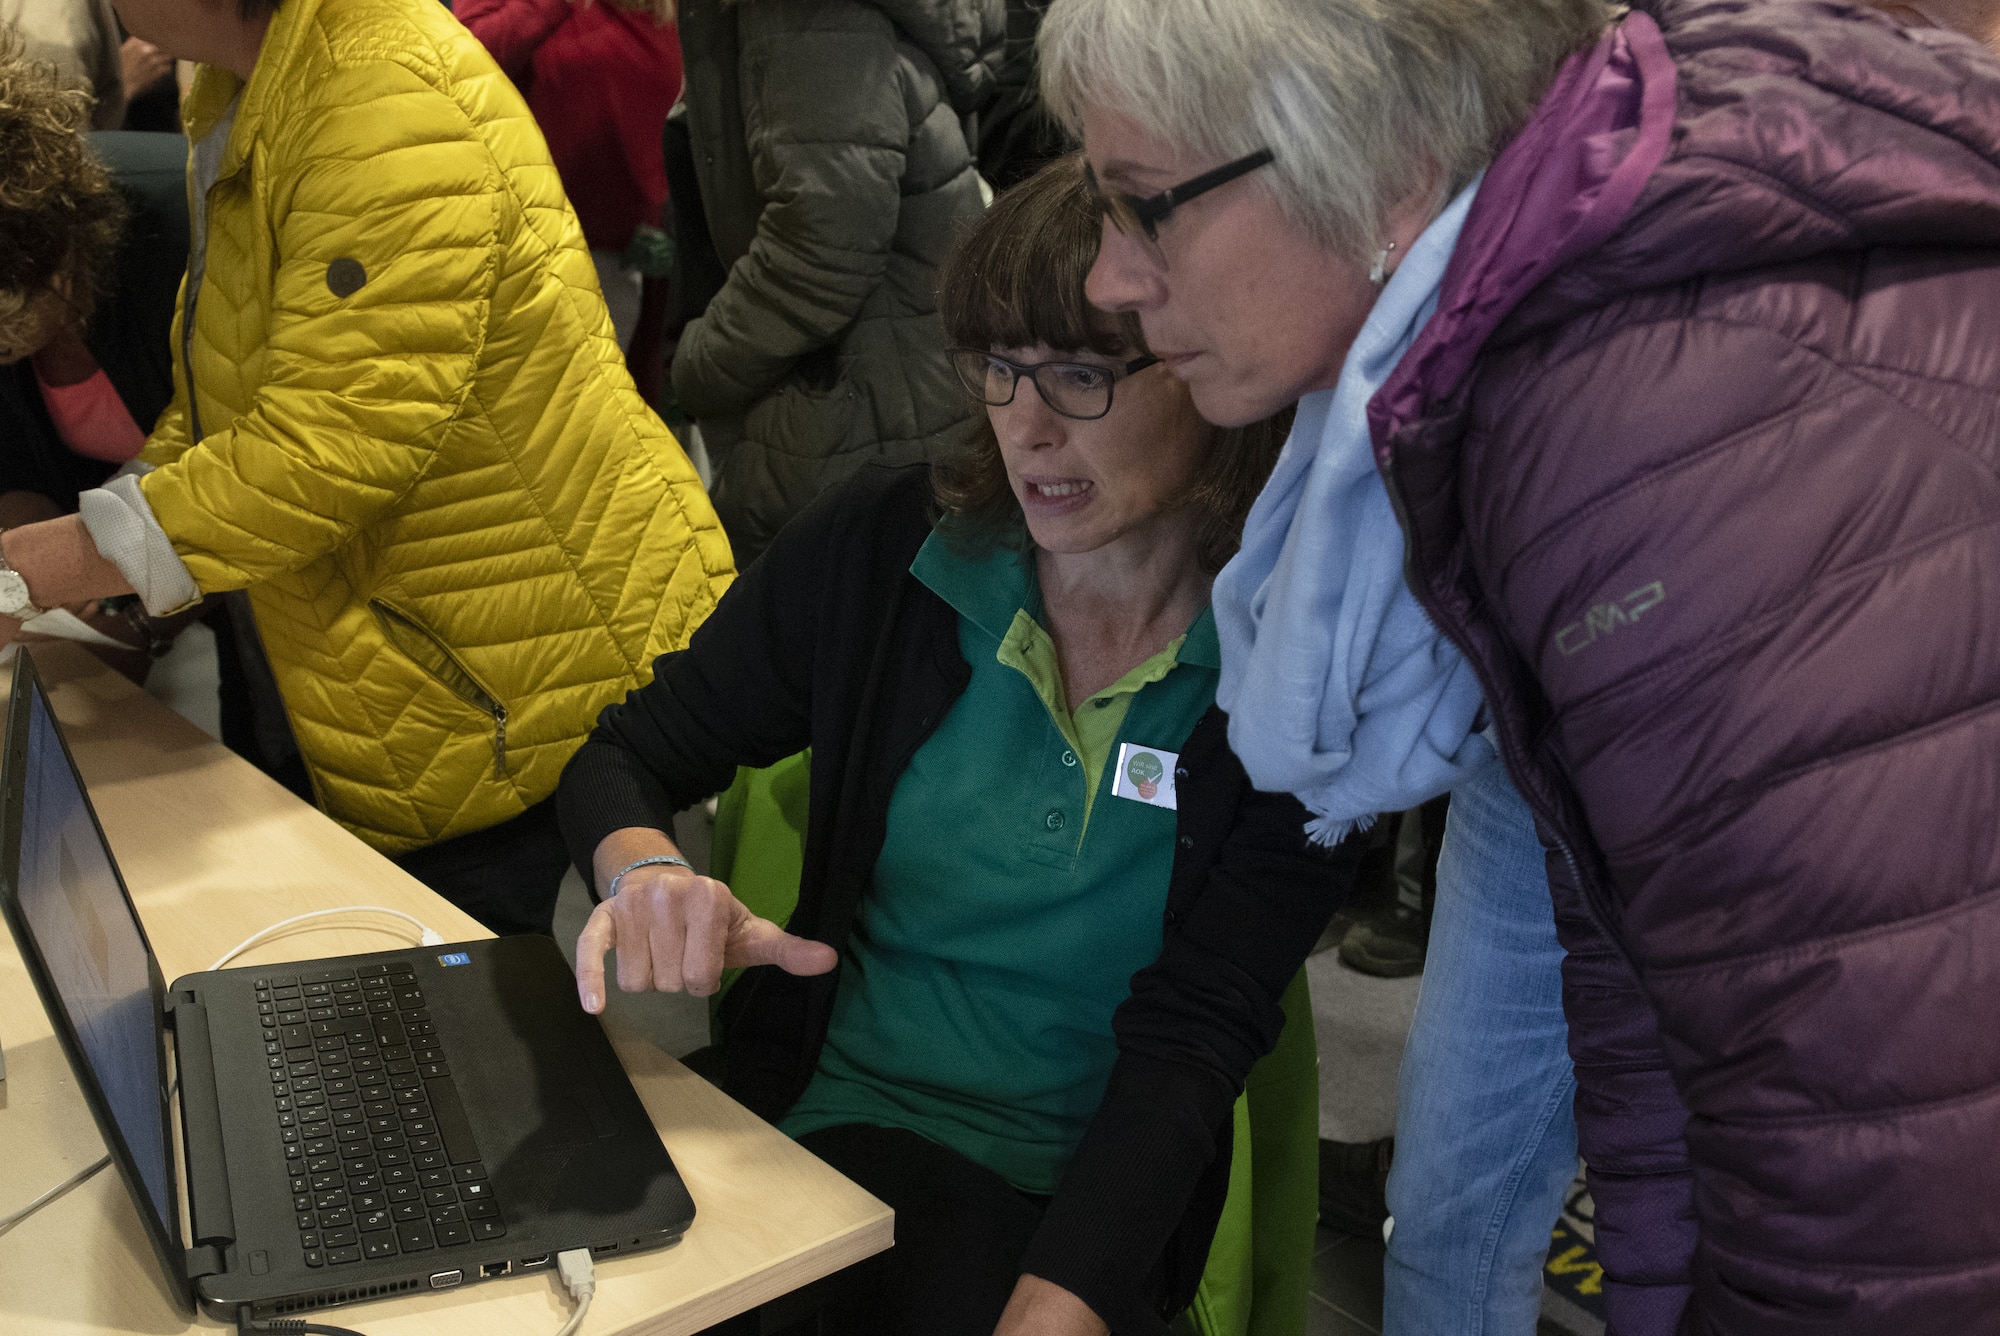 Sigrid Faber, a local-national sports teacher, center, explains the results of a balance assessment to a participant at the first local-national health fair at Spangdahlem Air Base, Germany, Sept. 24, 2019. Faber explained that balance is important to the health of the muscles, particularly for the back. Imbalance can cause back issues later on in life. (U.S. Air Force photo by Airman 1st Class Alison Stewart)